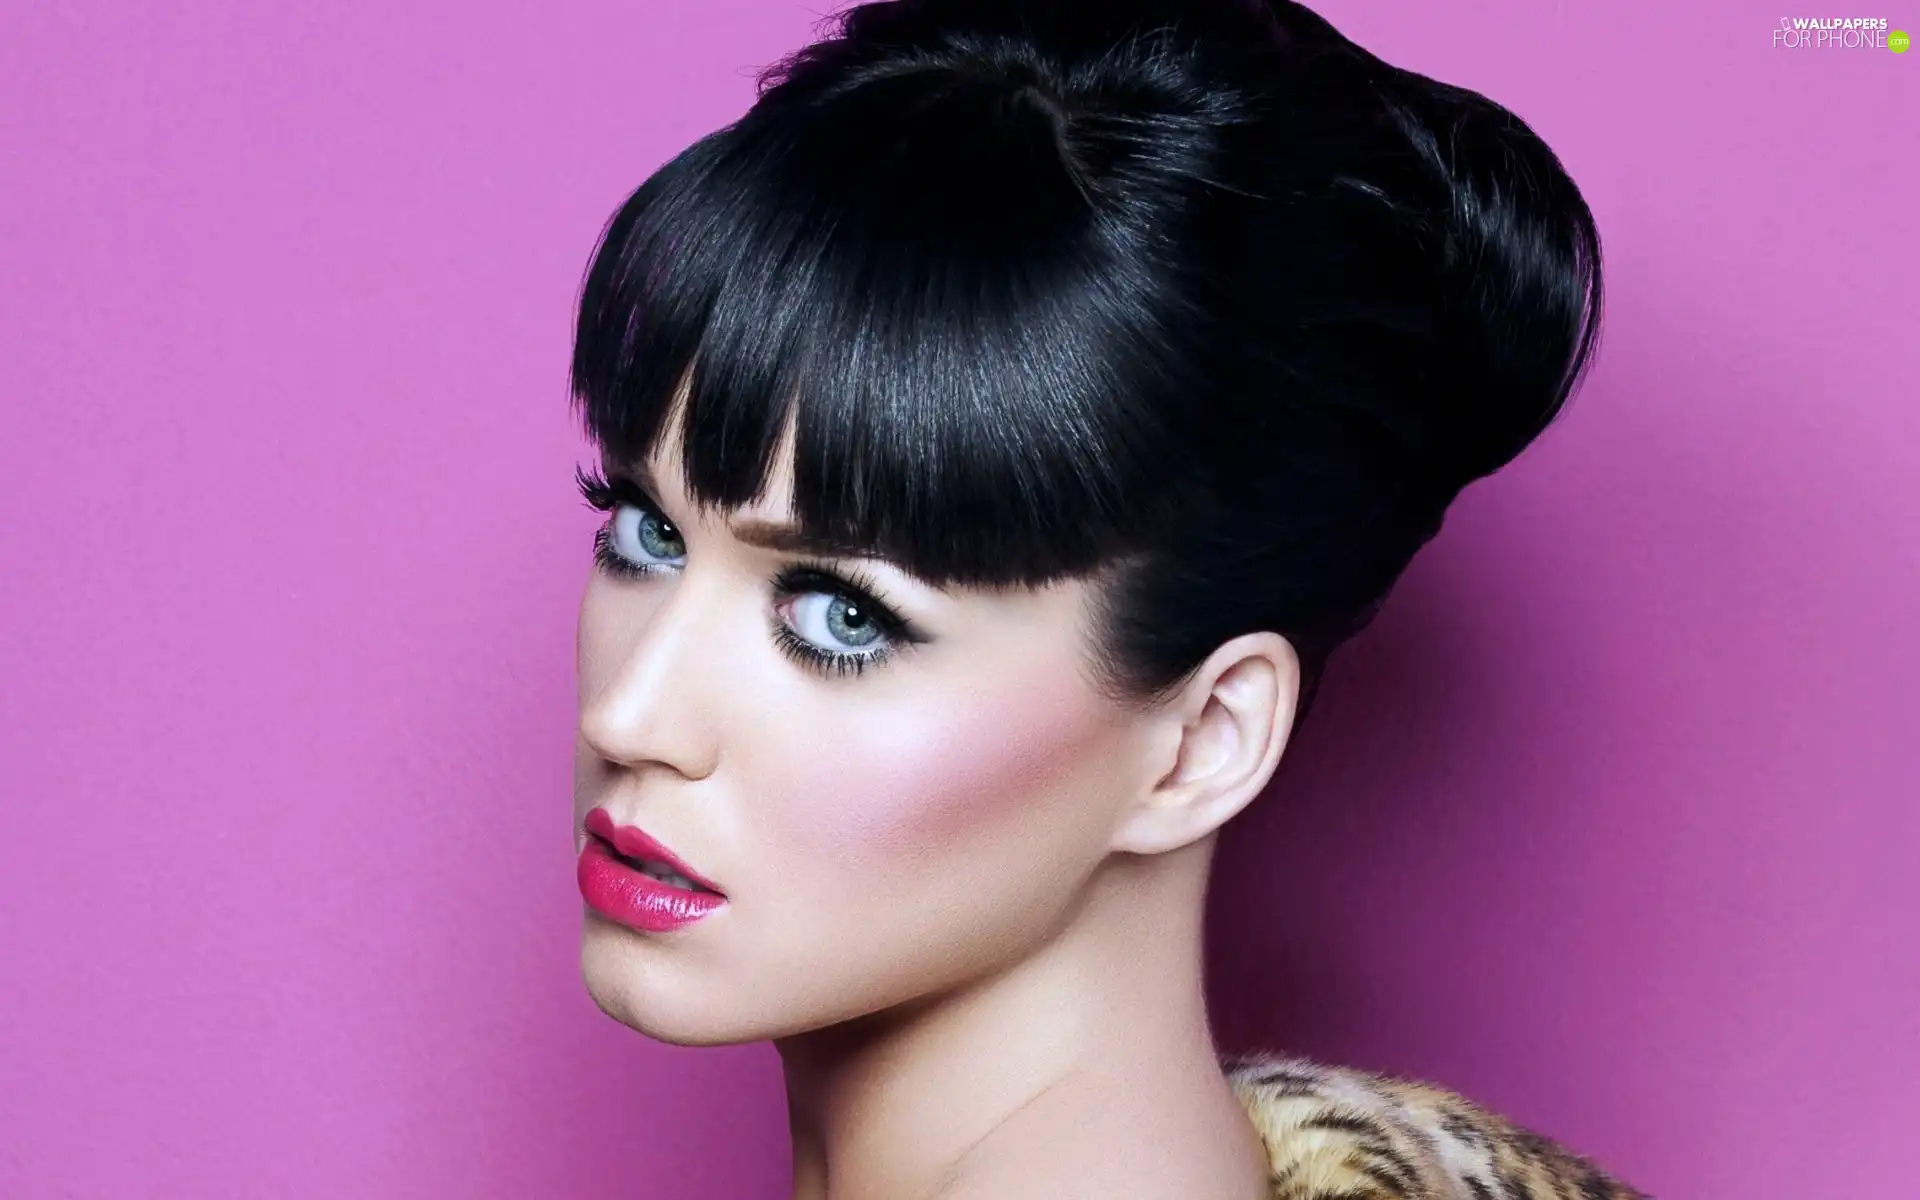 songster, Katy Perry